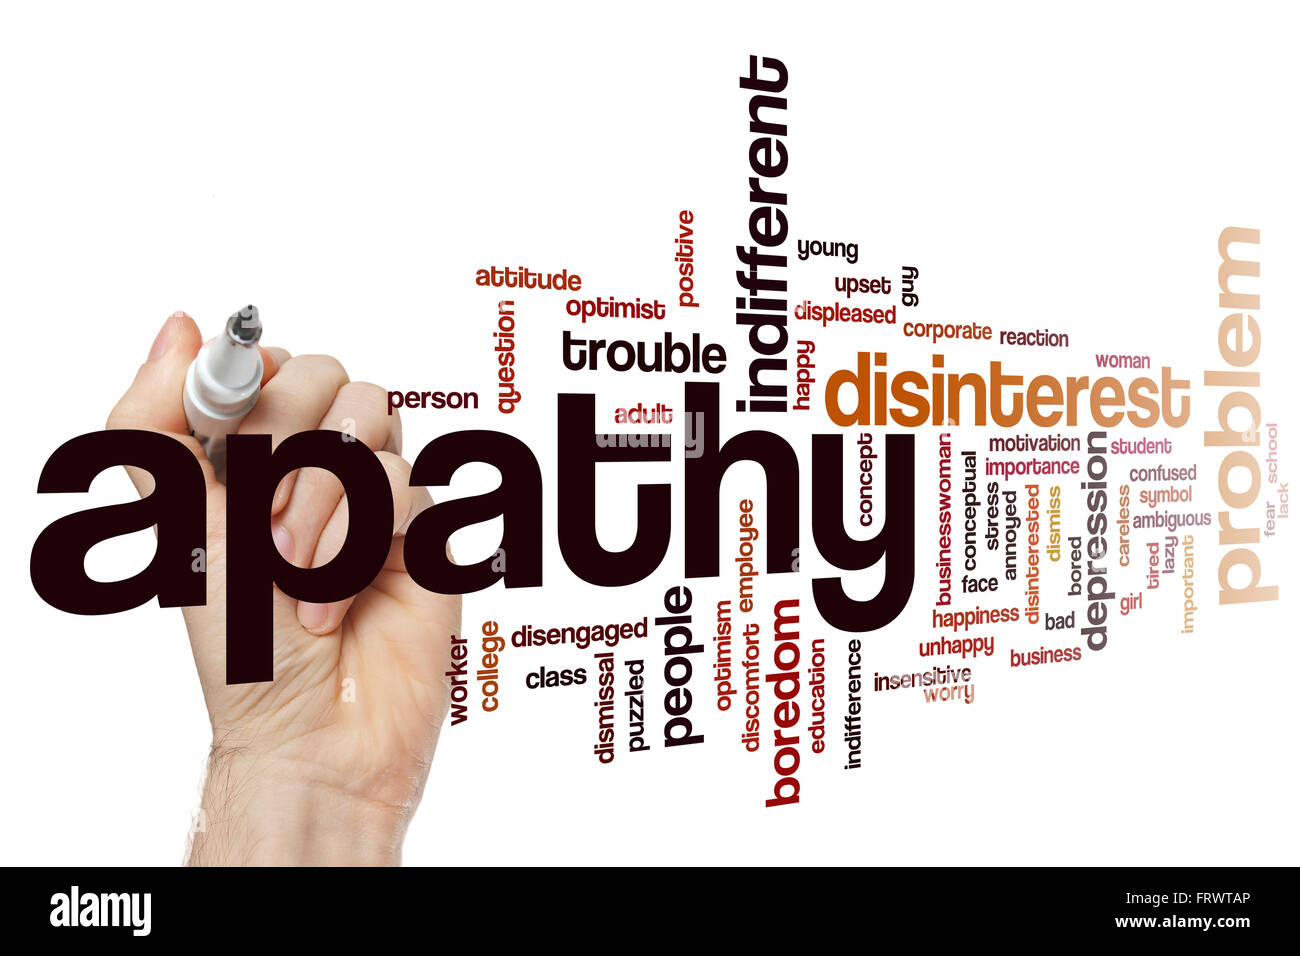 Apathy word cloud concept with disinterest indifferent related tags Stock Photo